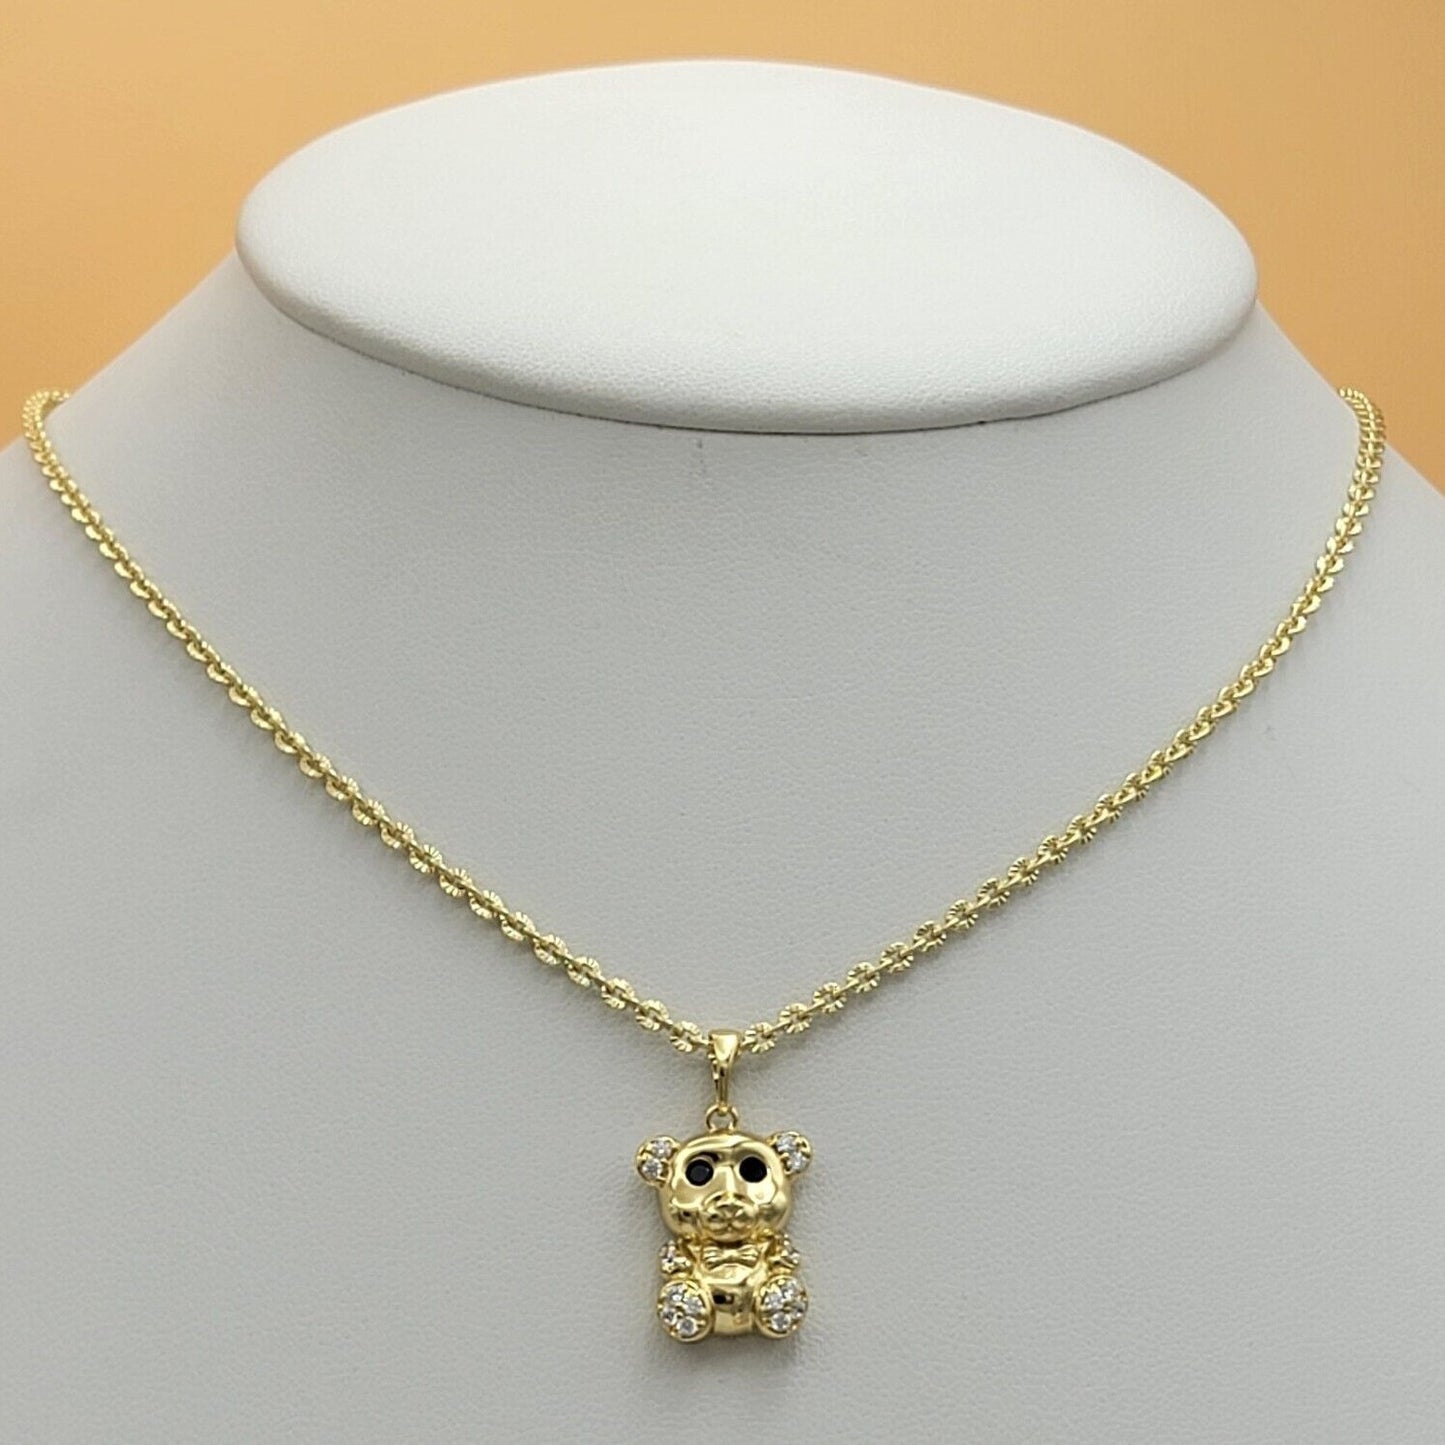 Necklaces - 14K Gold Plated. Cute Little Bear Pendant & Chain. Animal